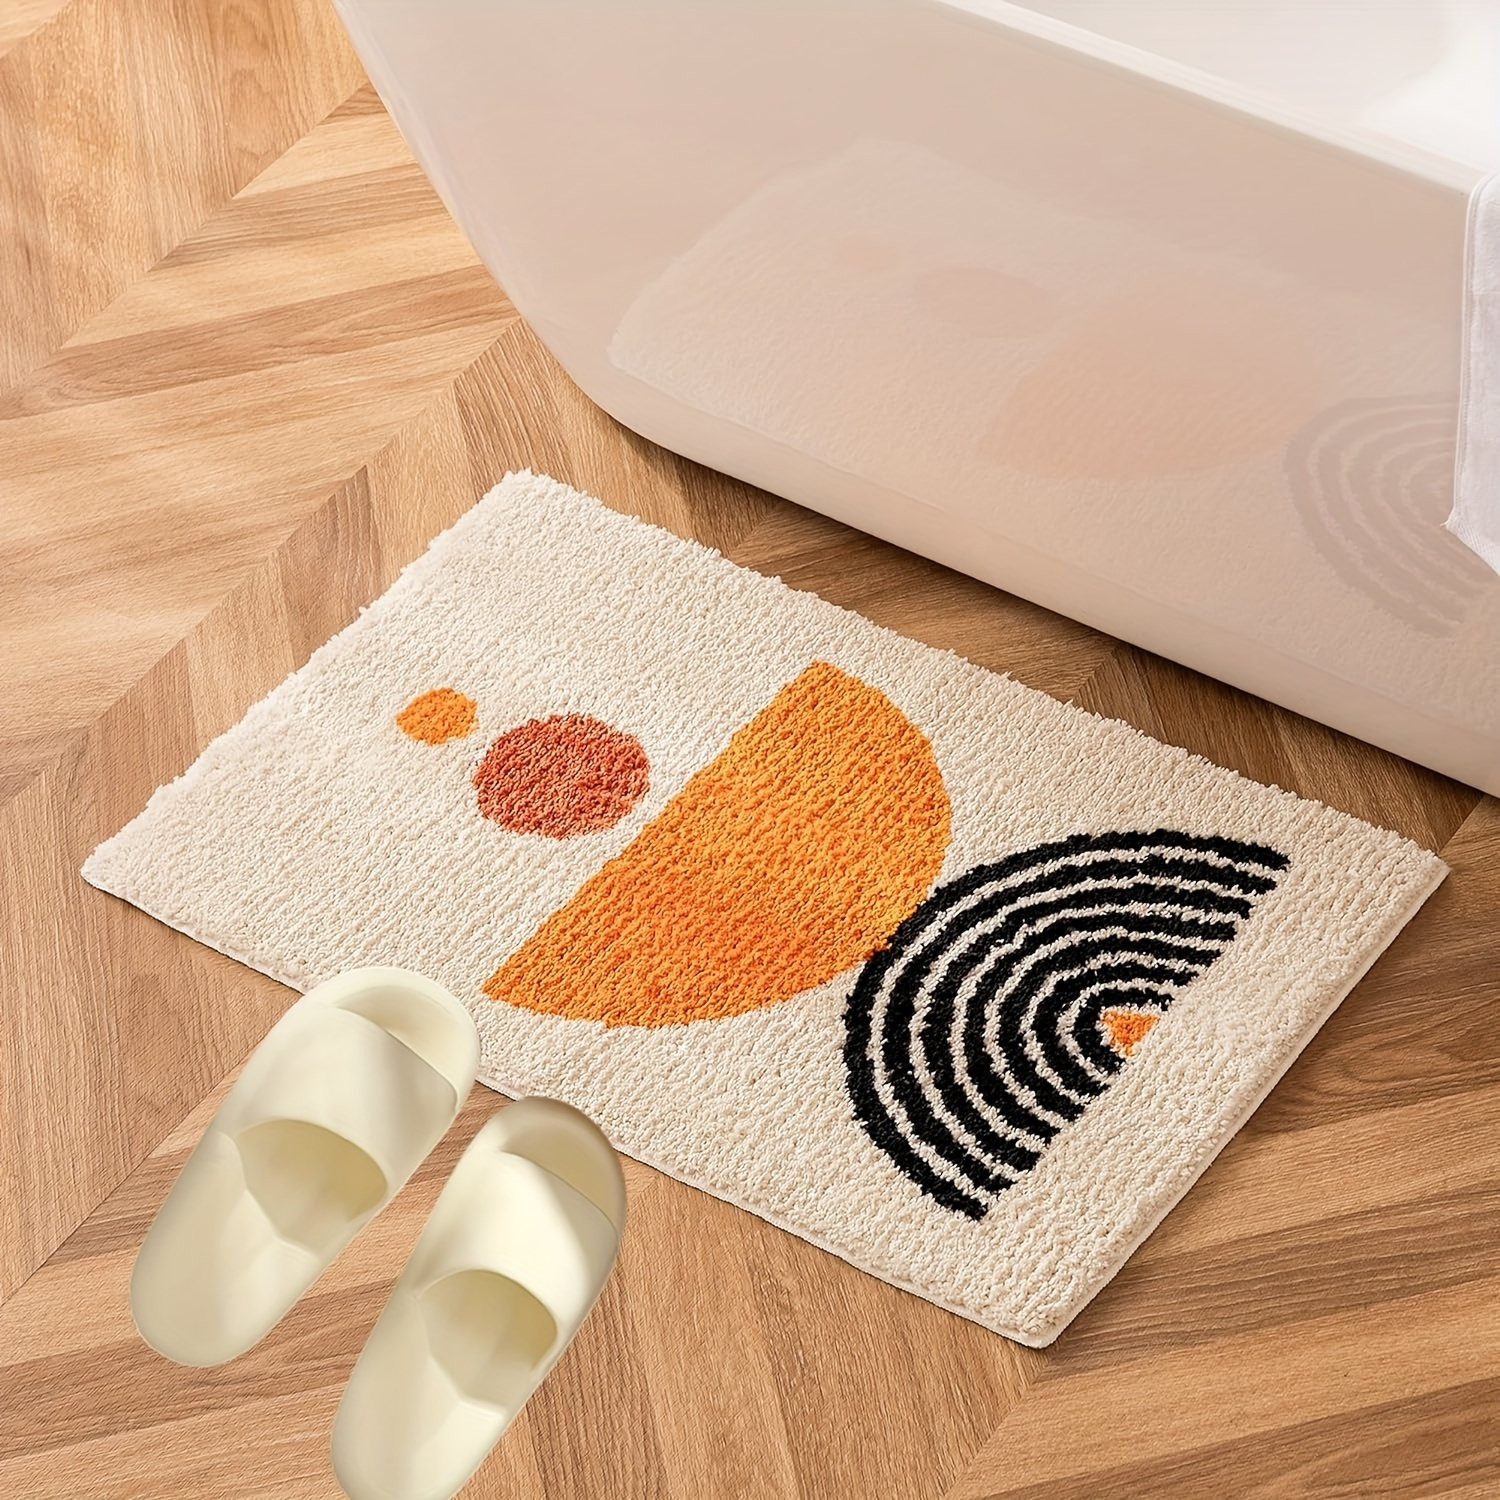 

1pc Non-slip Pad, Water-absorbent And Wear-resistant Soft Carpet, Suitable For Decorative Carpets In Bathrooms, Kitchens, Bedrooms, Living Rooms, And Passages